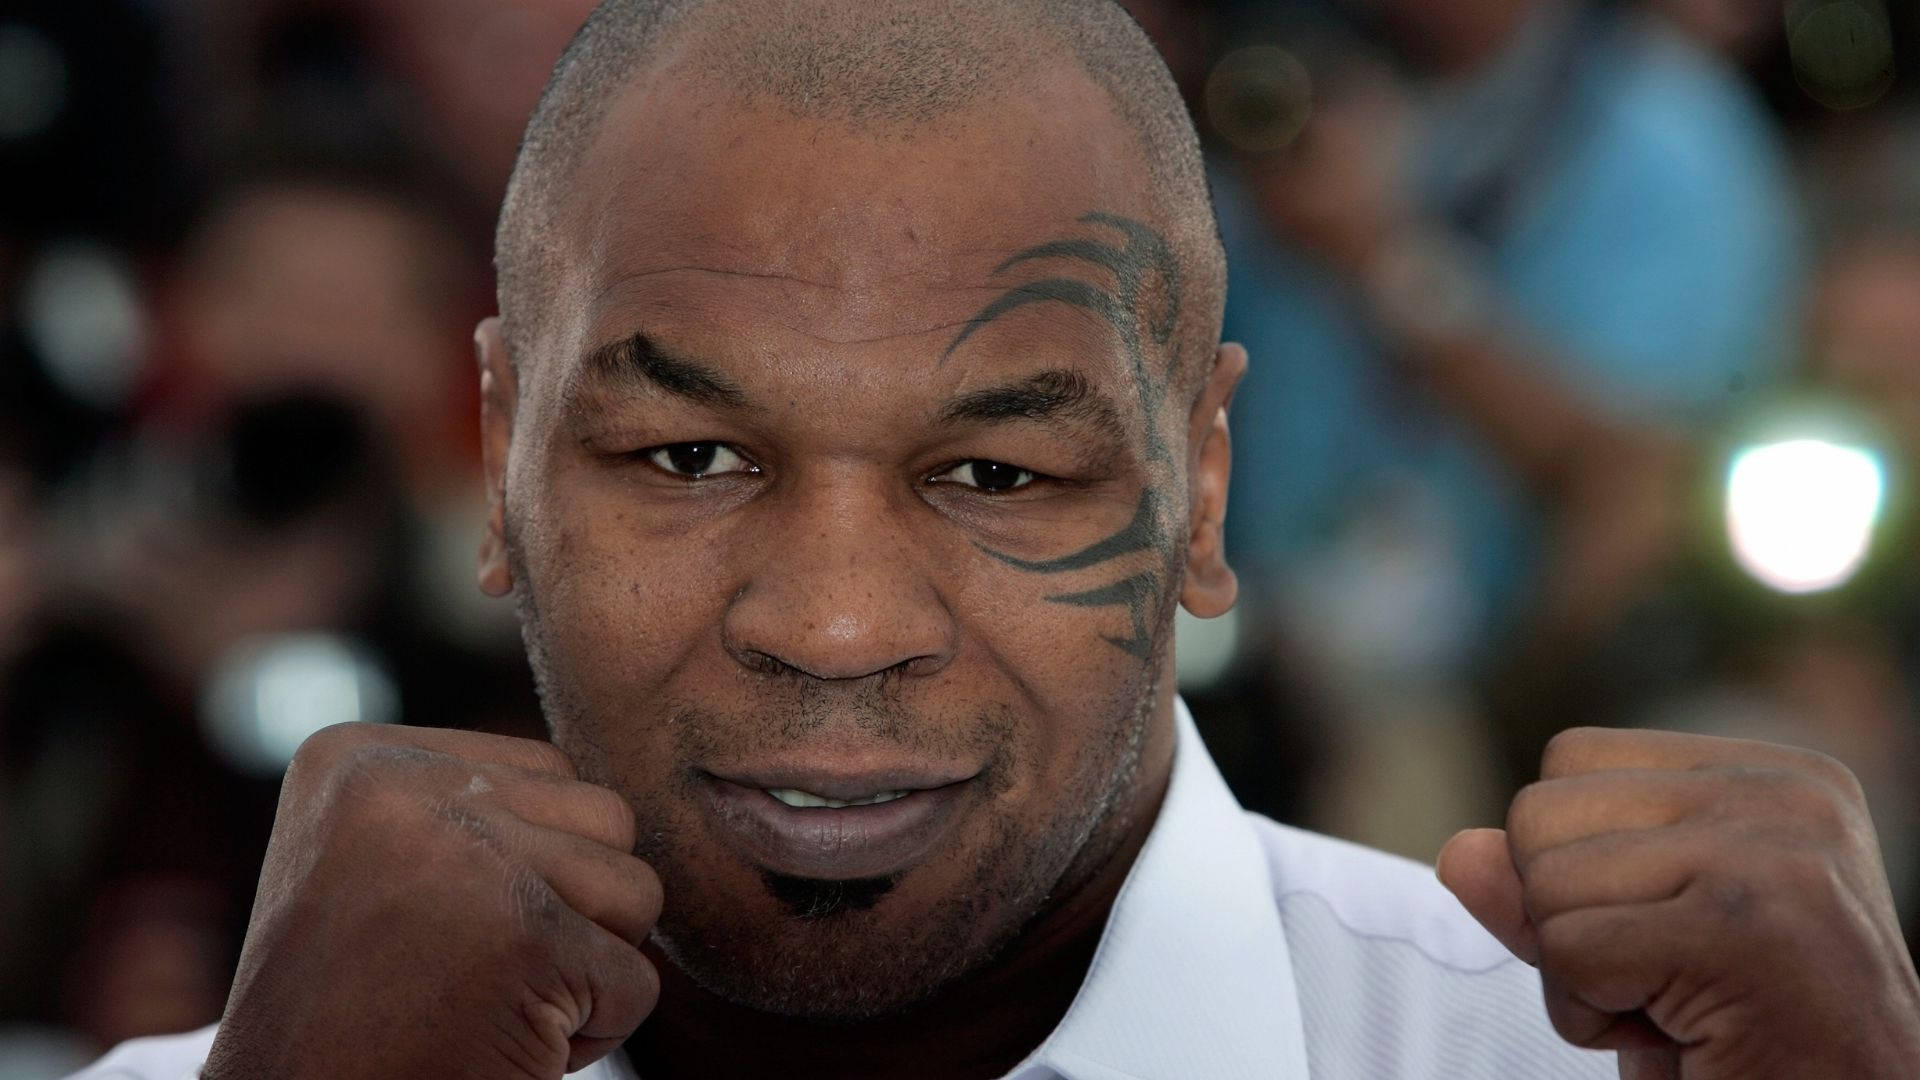 Mike Tyson Boxing Pose